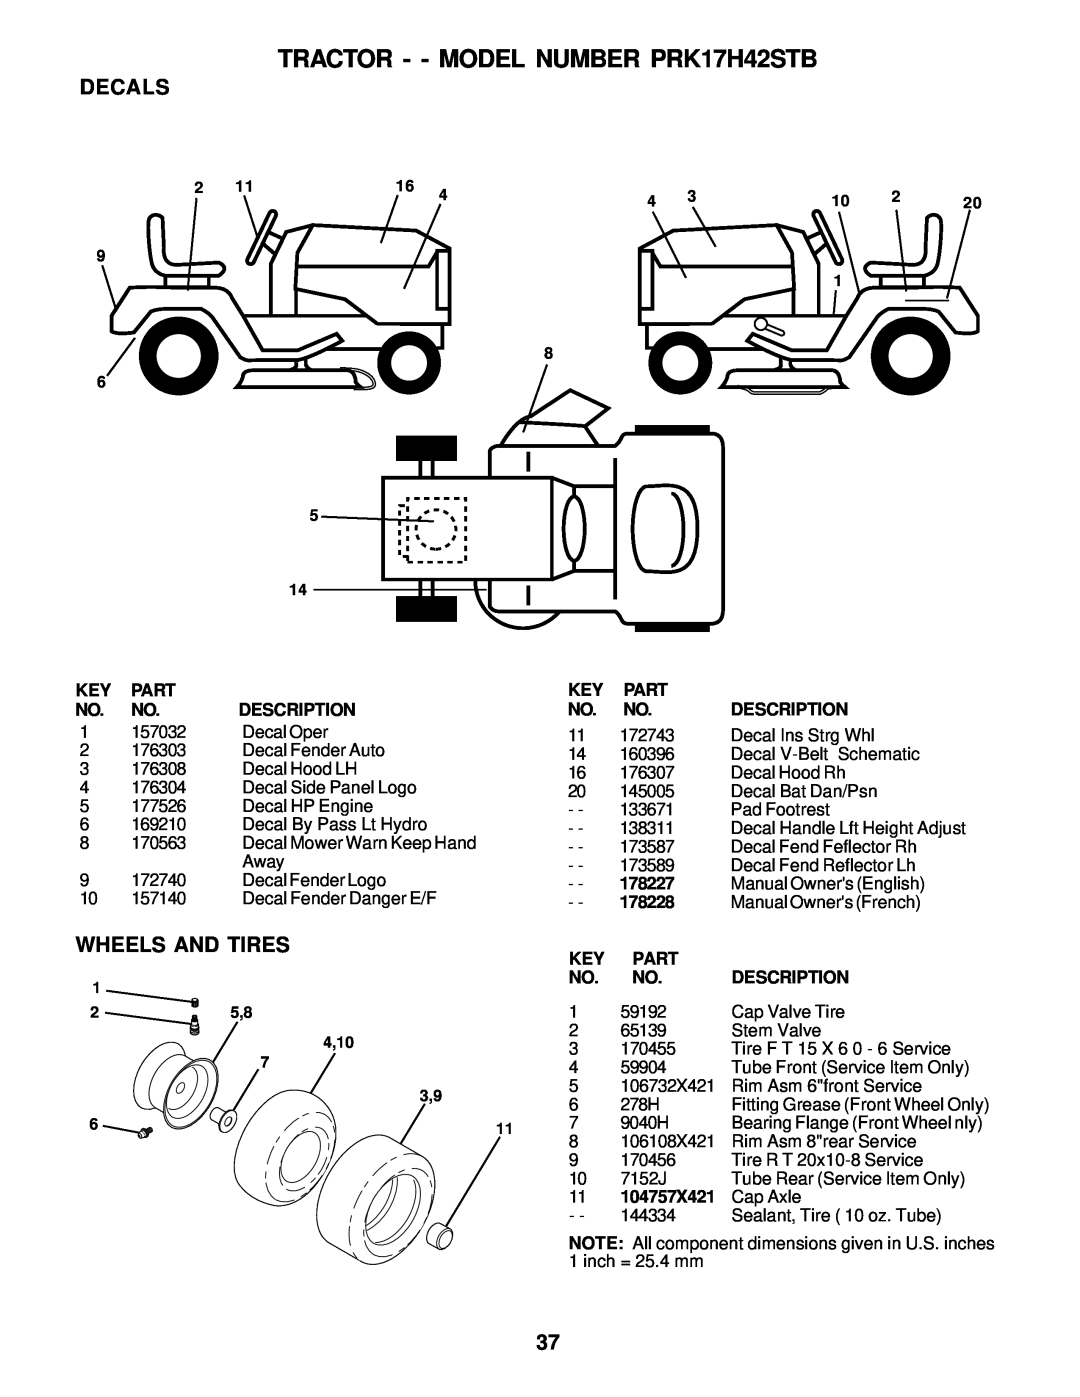 Poulan 178227 owner manual Decals, Wheels And Tires, TRACTOR - - MODEL NUMBER PRK17H42STB, Part, 4,10 